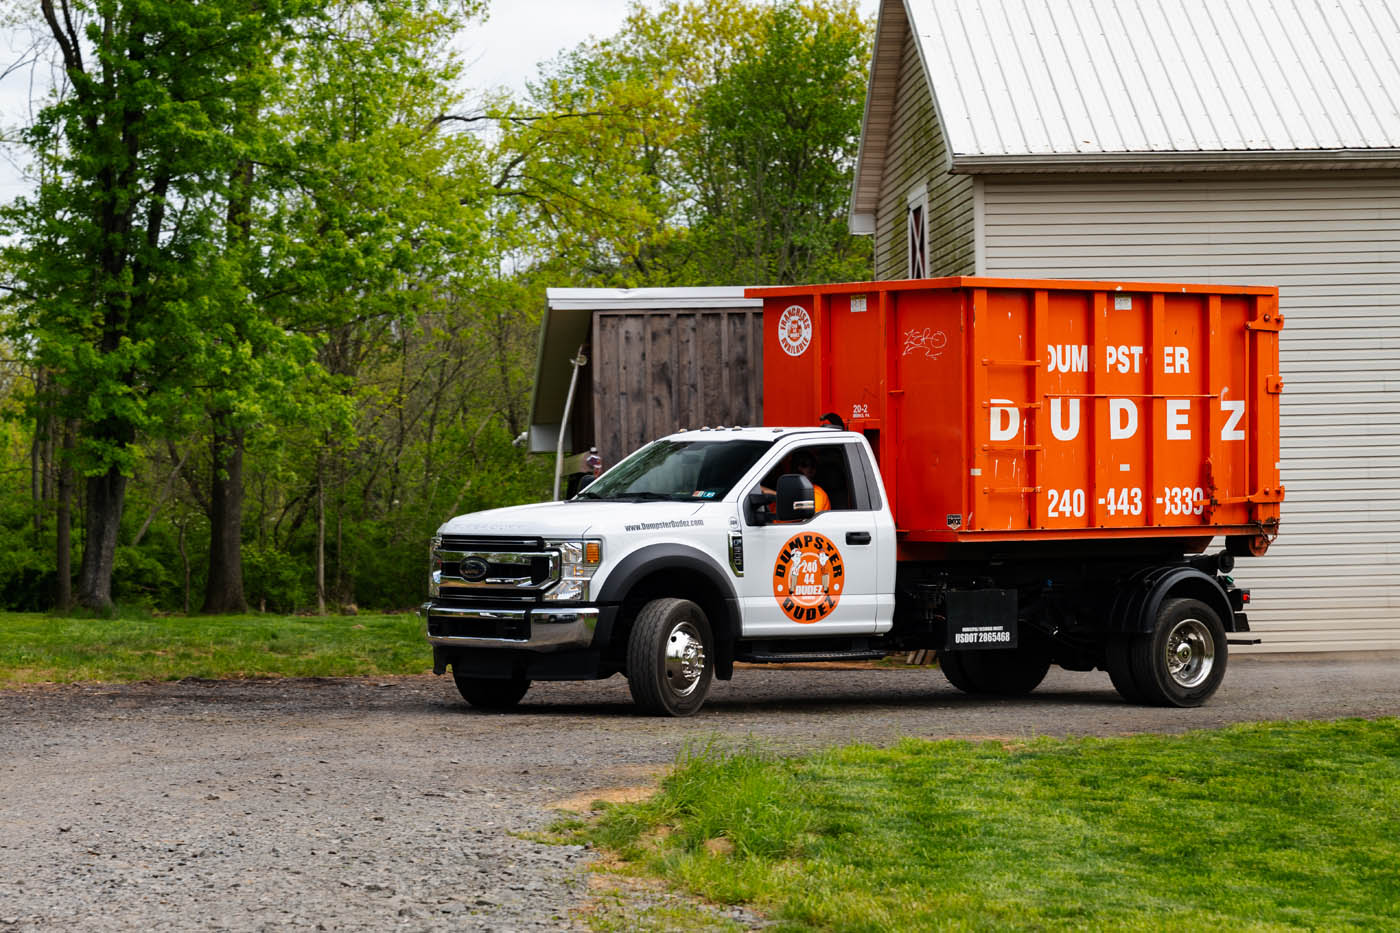 A truck brings the perfect sized Dumpster Dudez dumpster to a home for a cleanup project - contact us today to learn more about our dumpster sizes!